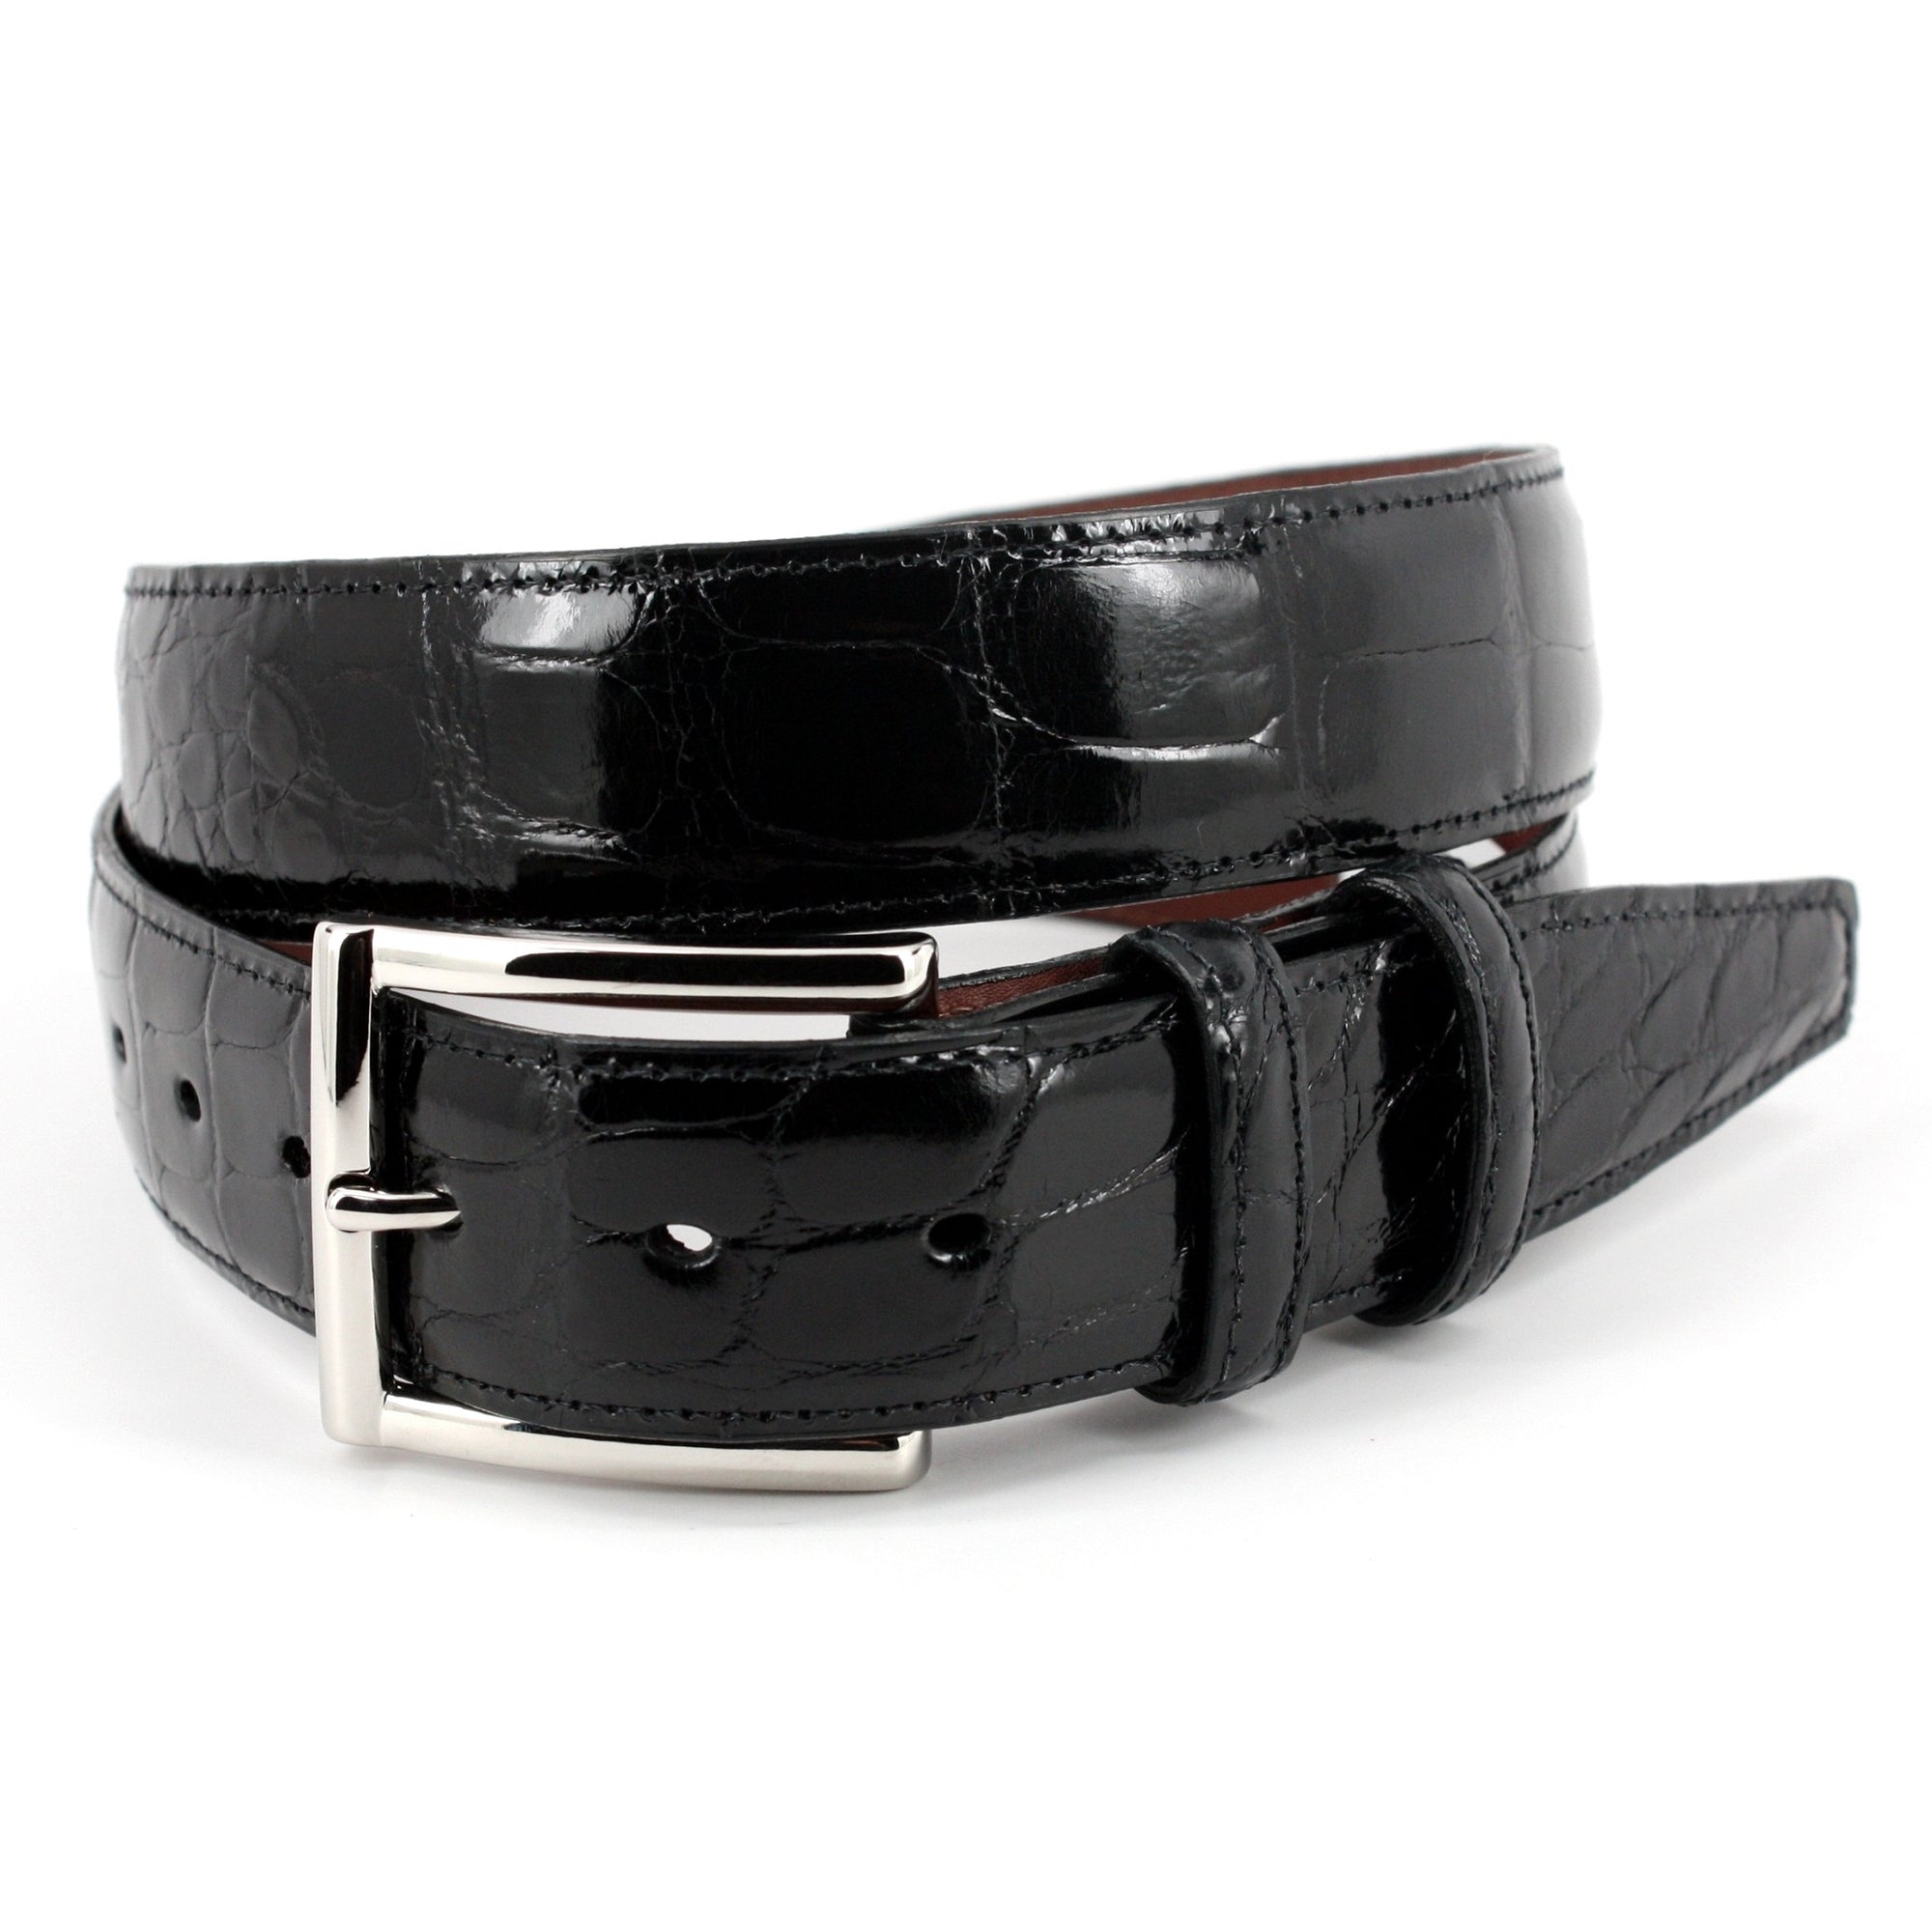 American Alligator Stitched Edge Belt in Black by Torino Leather